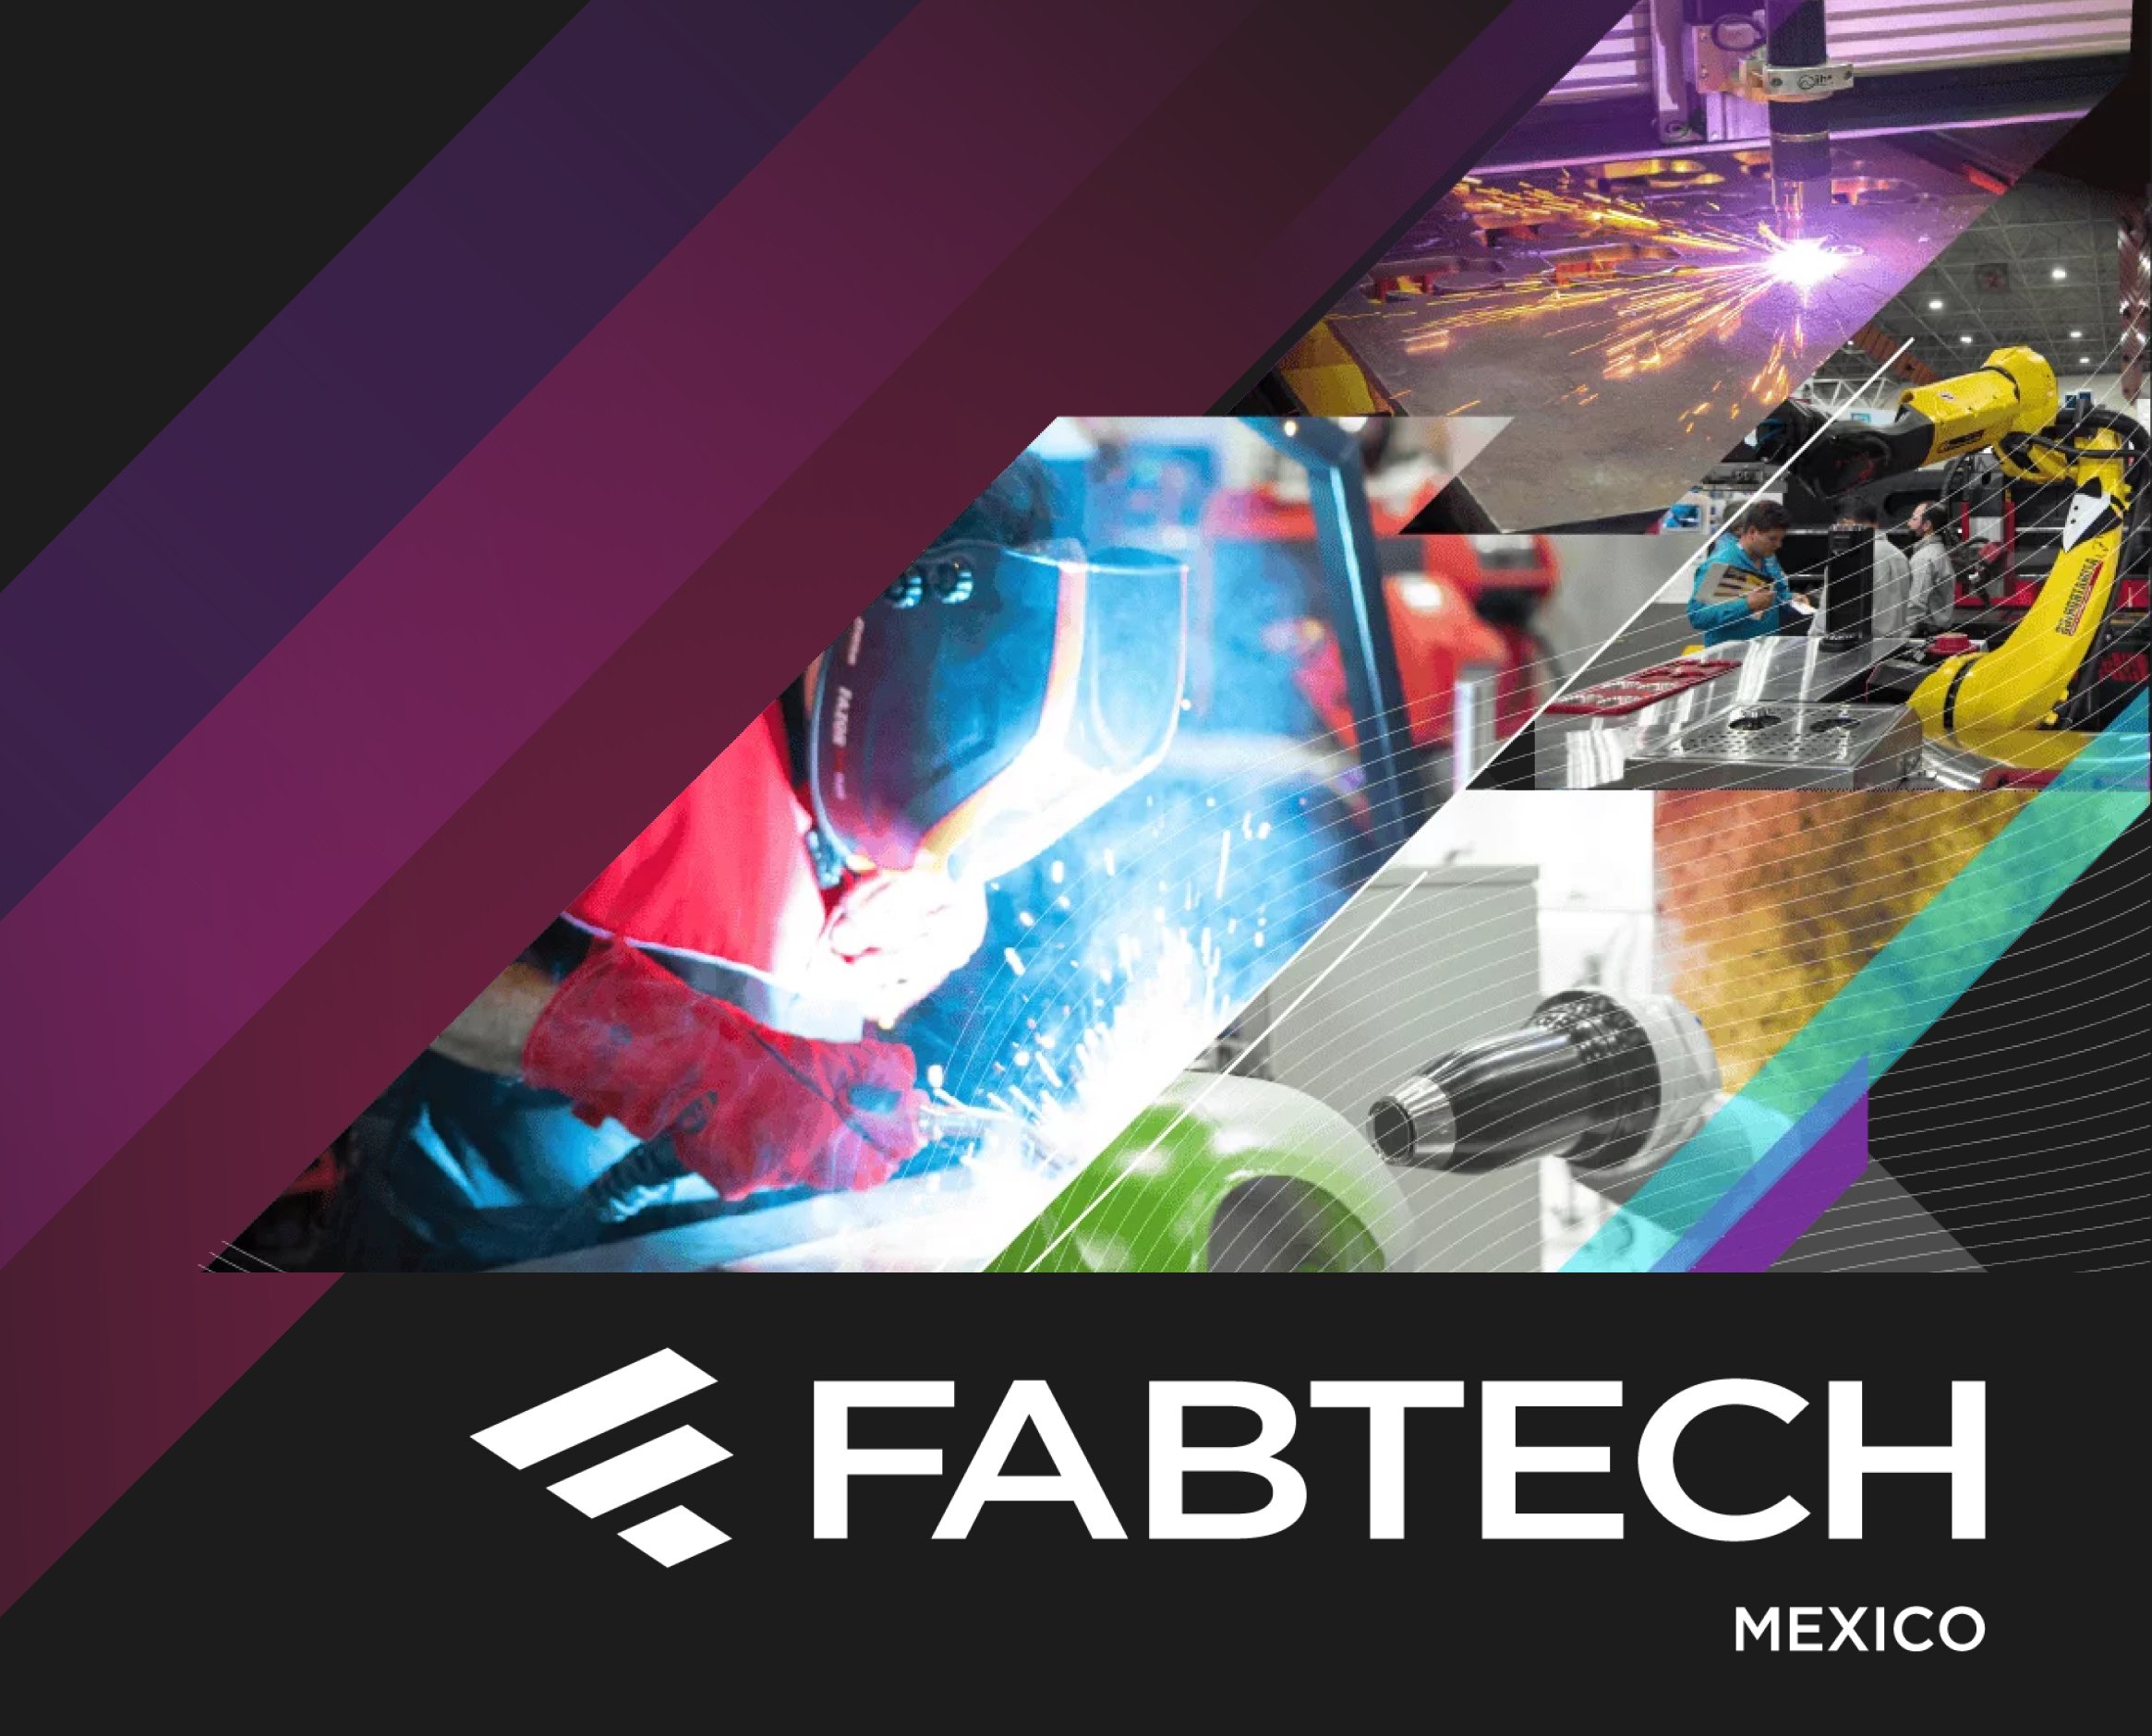 Back in Mexico City for the 2023 Edition of FABTECH Mexico